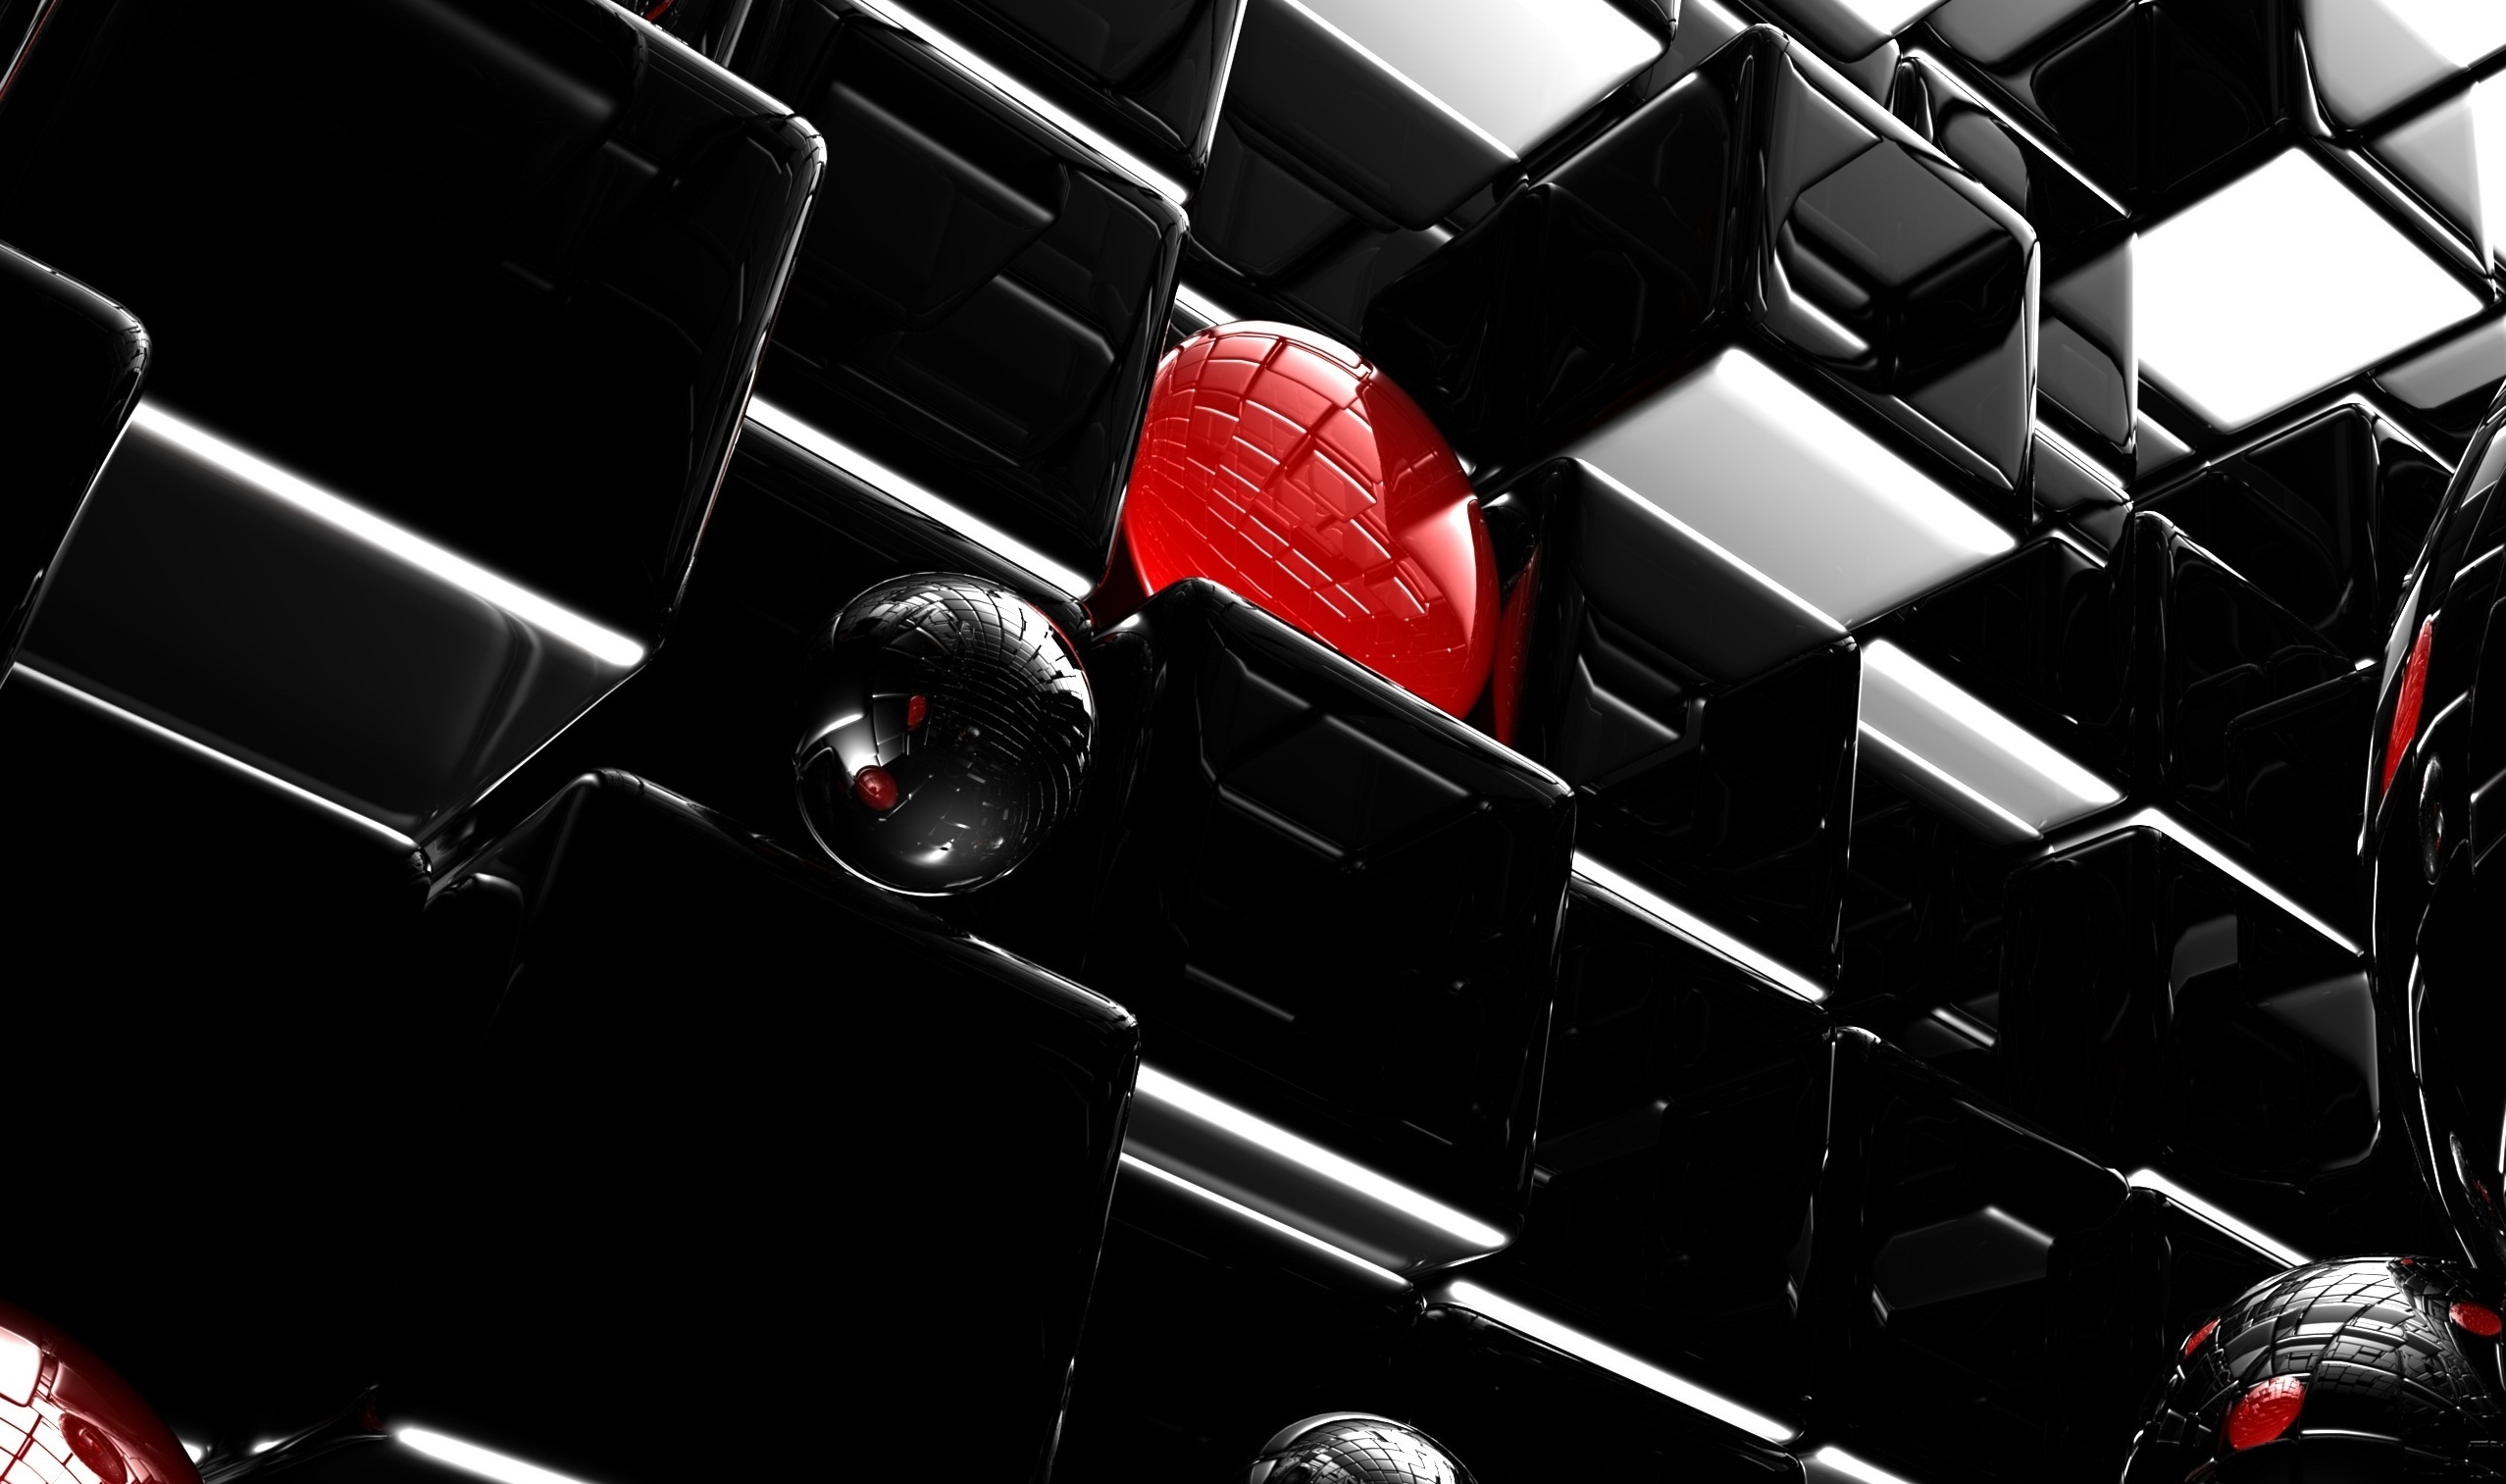 android 3d, black, dark, 3d art, cube, artistic, red